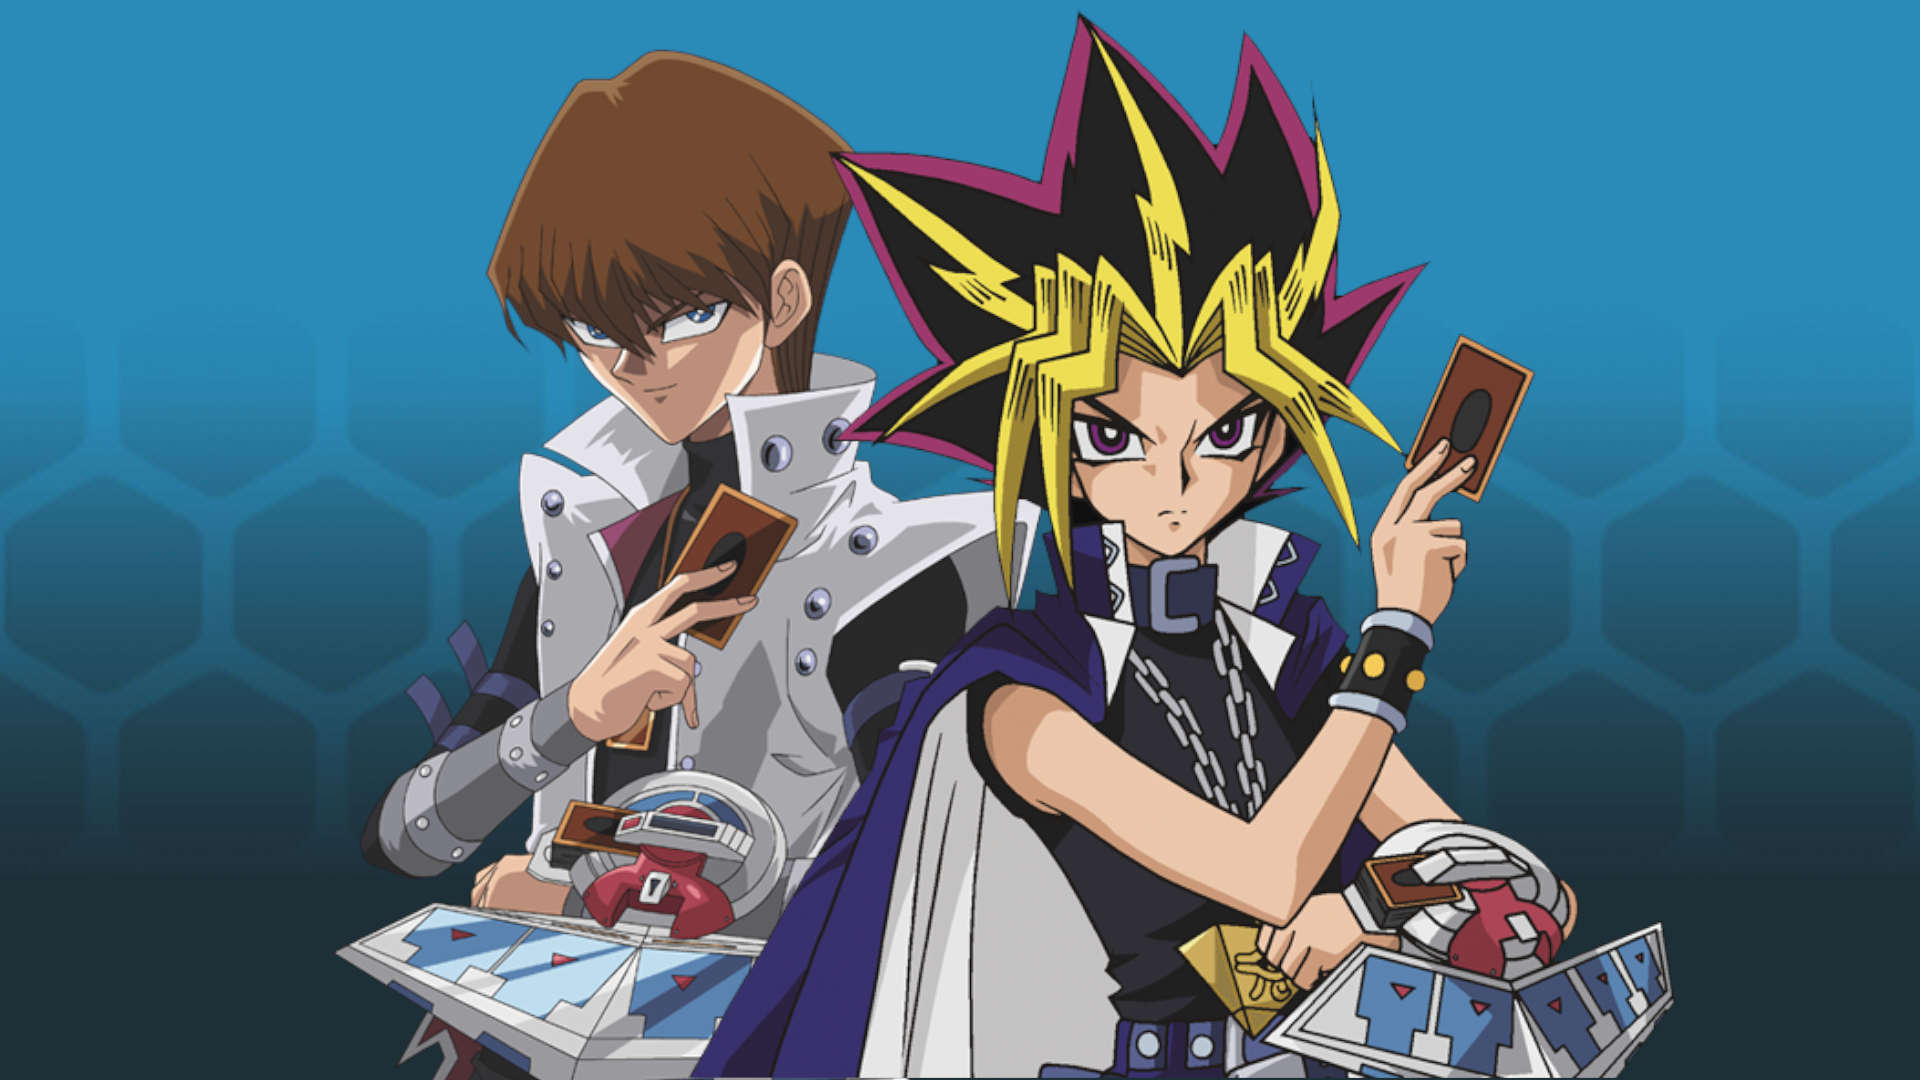 So we are getting this. Is this even real? : r/yugioh